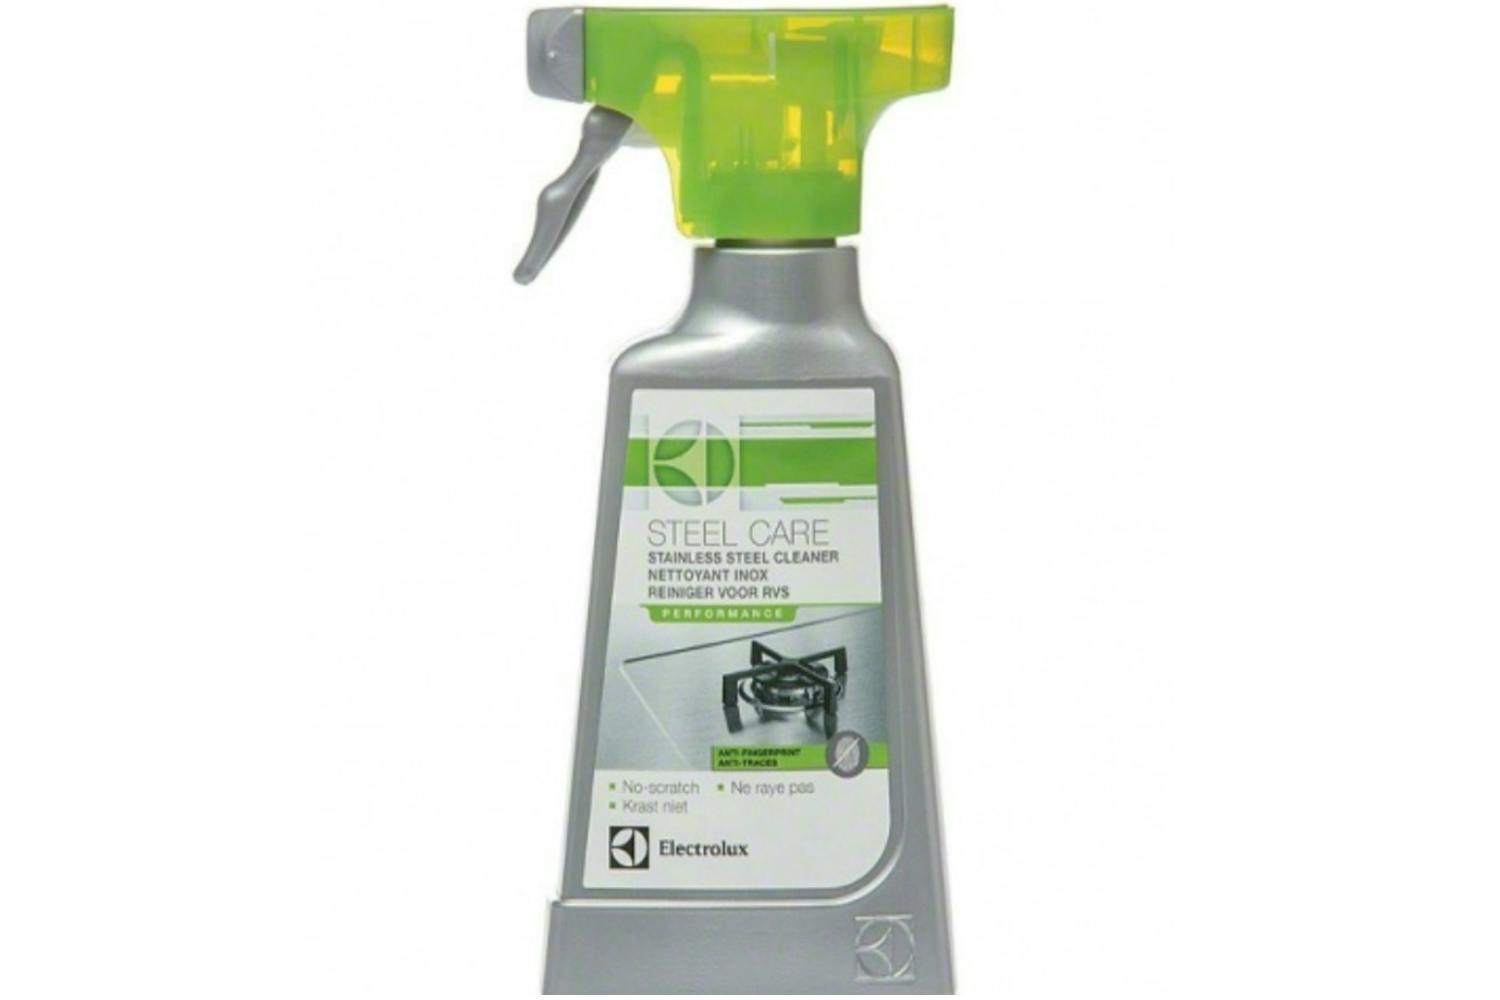 Electrolux Steelcare Stainless Steel Cleaner | 250ml